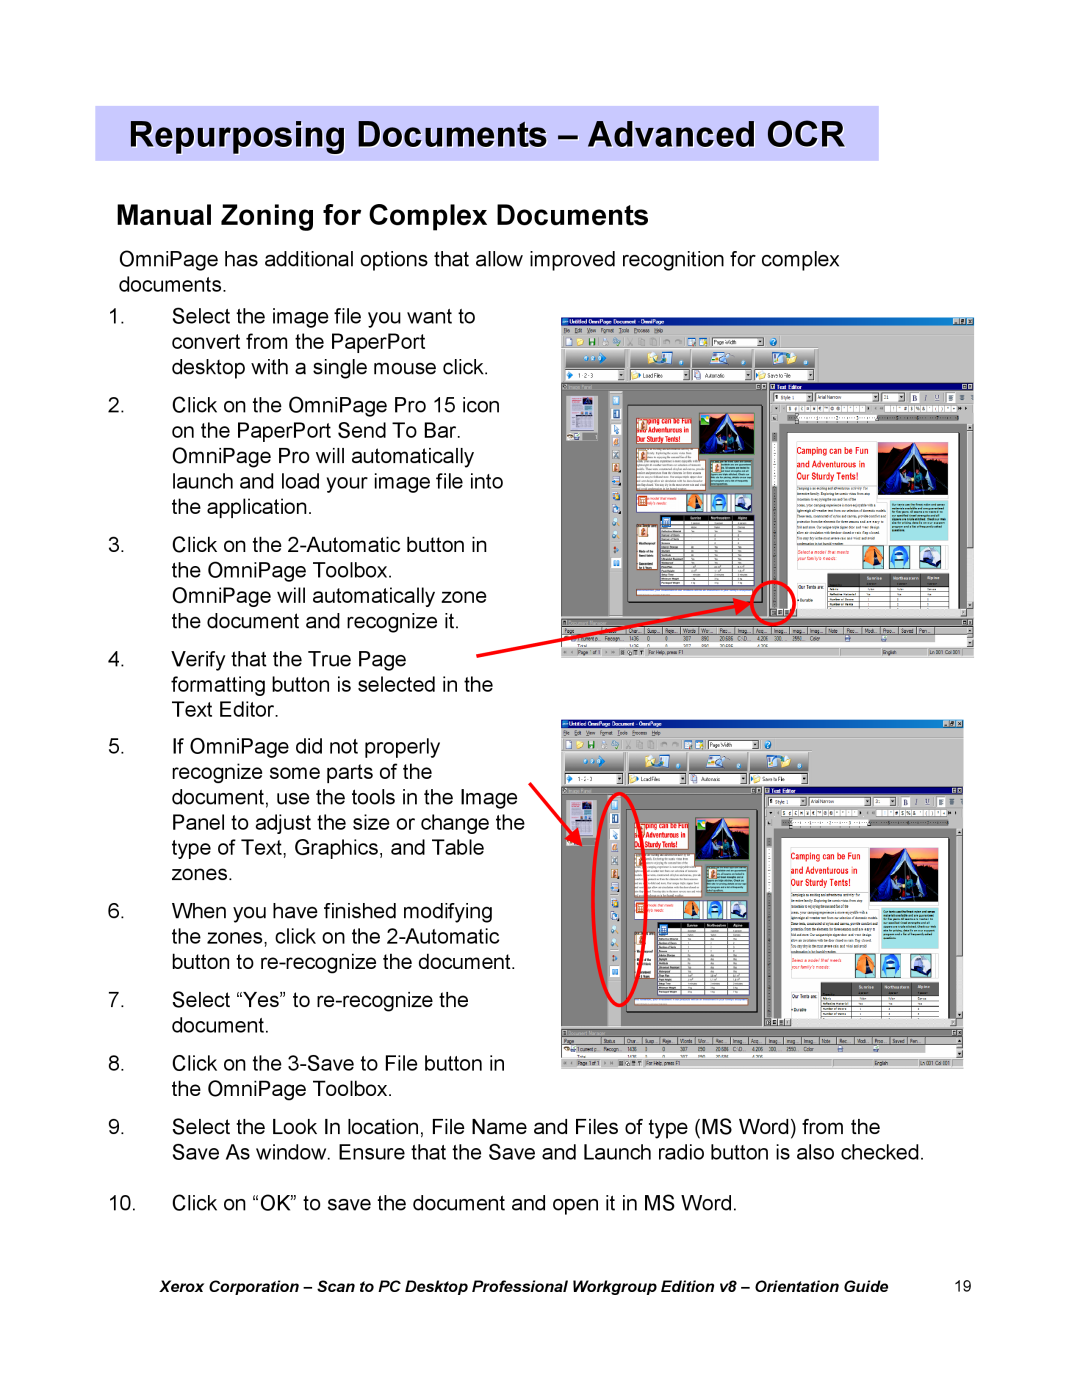 Xerox G8144Z manual Repurposing Documents -Advanced OCR, Manual Zoning for Complex Documents 